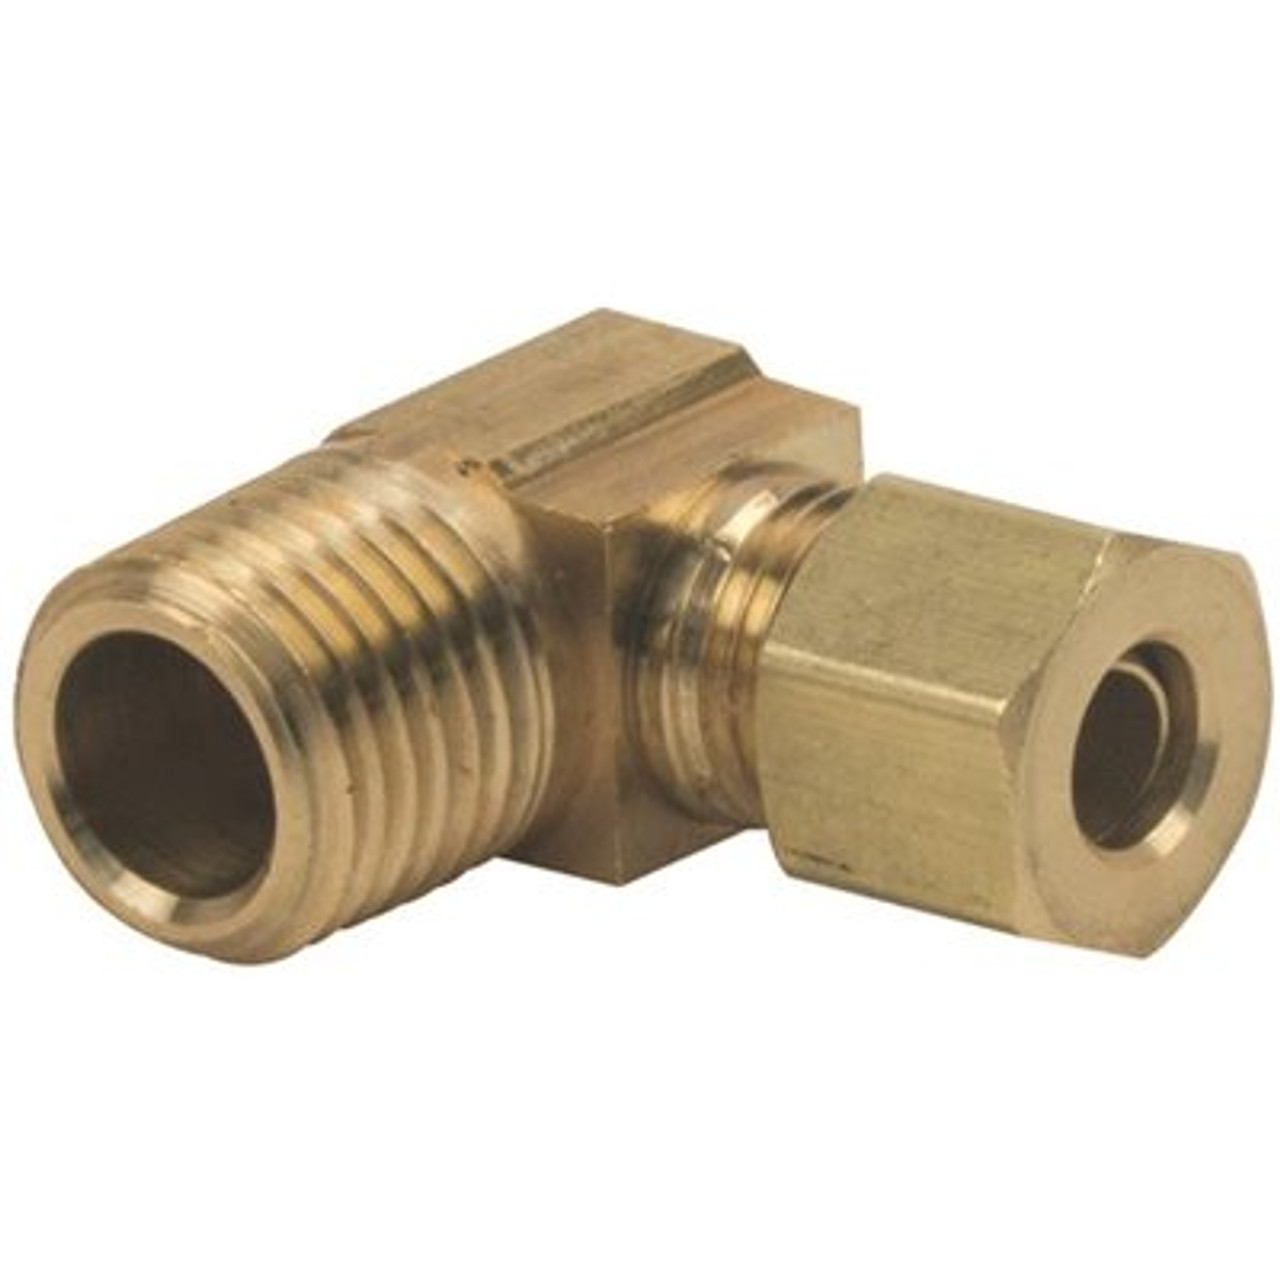 Brasscraft 69-1/4 In. O.D. Tube X 1/4 In. Mip Brass Compression Male 90-Degree Elbow Fitting